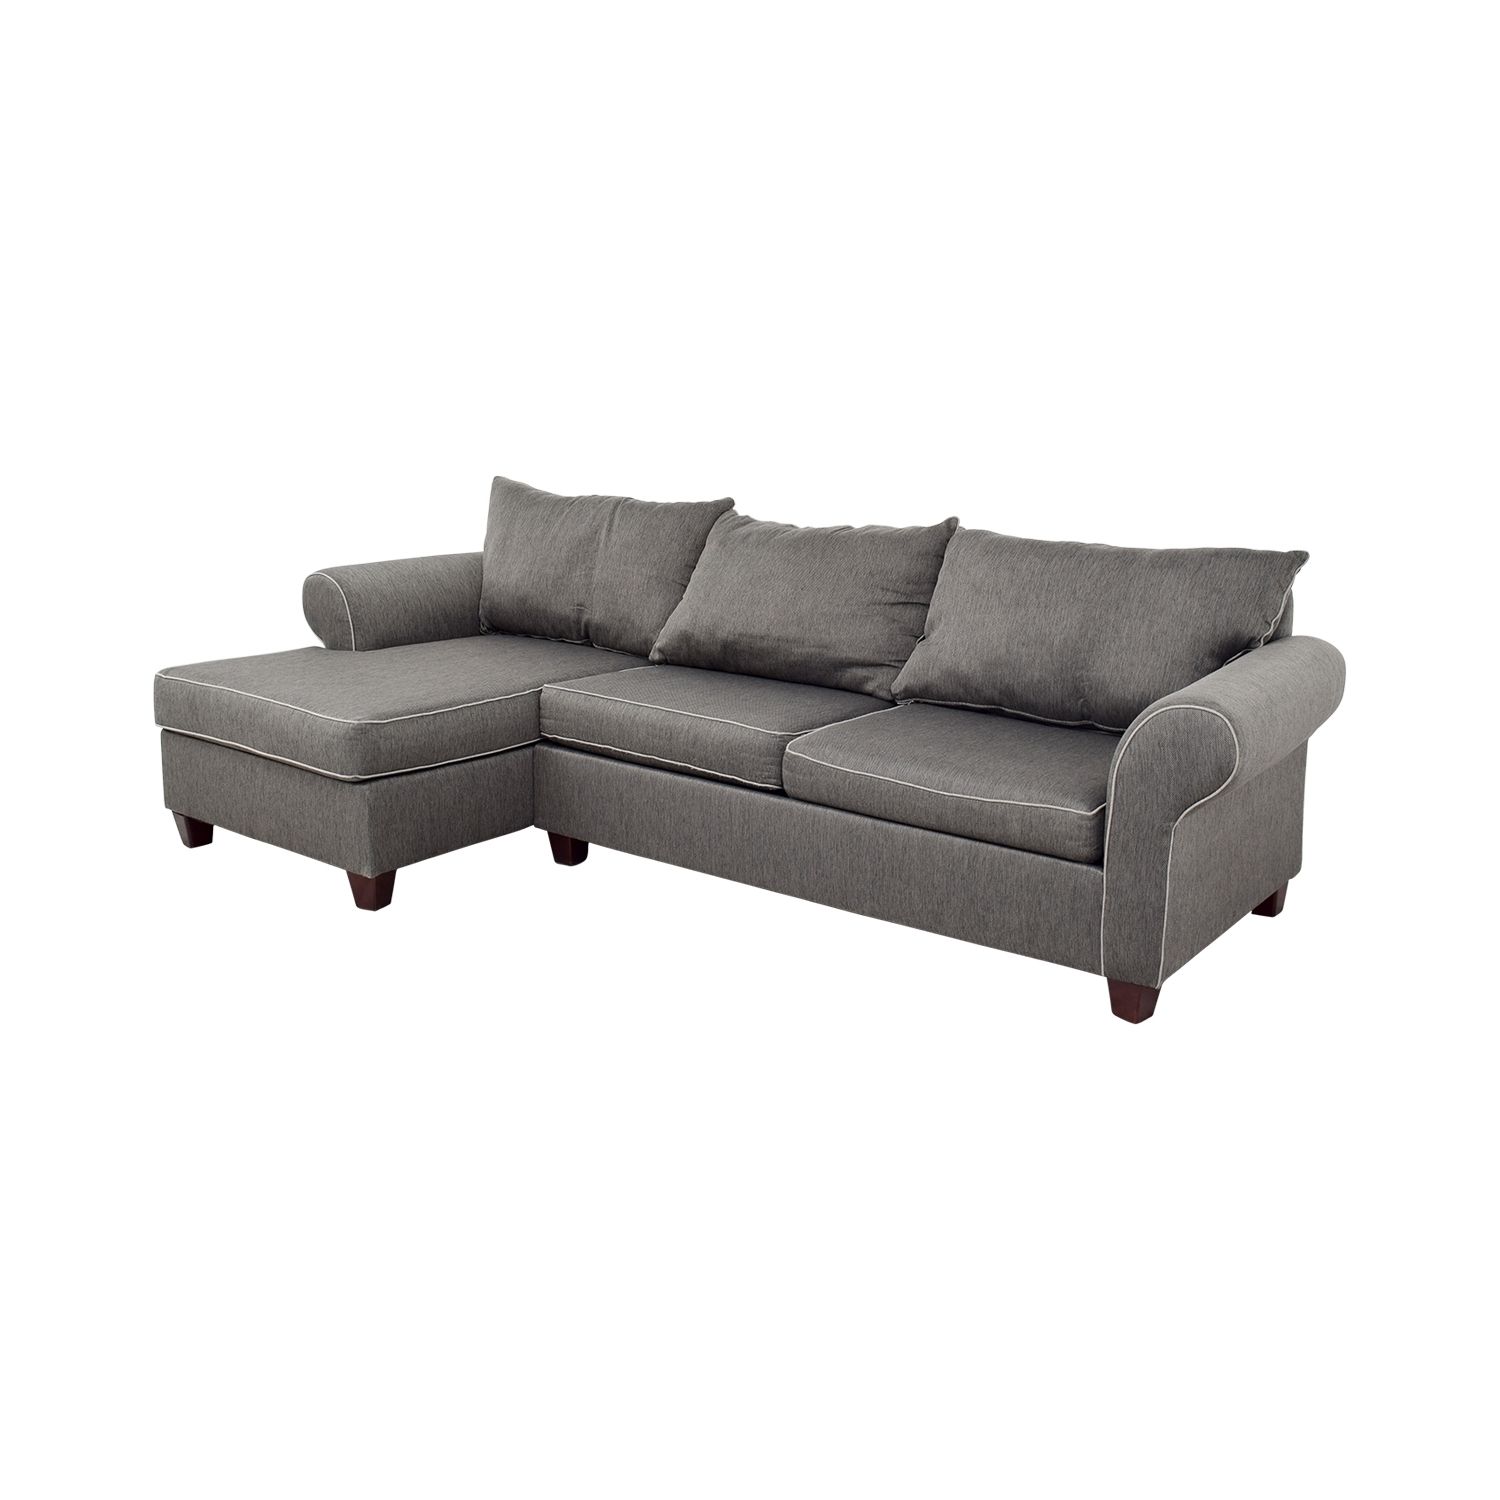 [%58% Off – Bob's Furniture Bob's Furniture Grey Chaise Sectional For Most Up To Date Bobs Furniture Chaises|bobs Furniture Chaises For Newest 58% Off – Bob's Furniture Bob's Furniture Grey Chaise Sectional|fashionable Bobs Furniture Chaises For 58% Off – Bob's Furniture Bob's Furniture Grey Chaise Sectional|fashionable 58% Off – Bob's Furniture Bob's Furniture Grey Chaise Sectional Throughout Bobs Furniture Chaises%] (View 2 of 15)